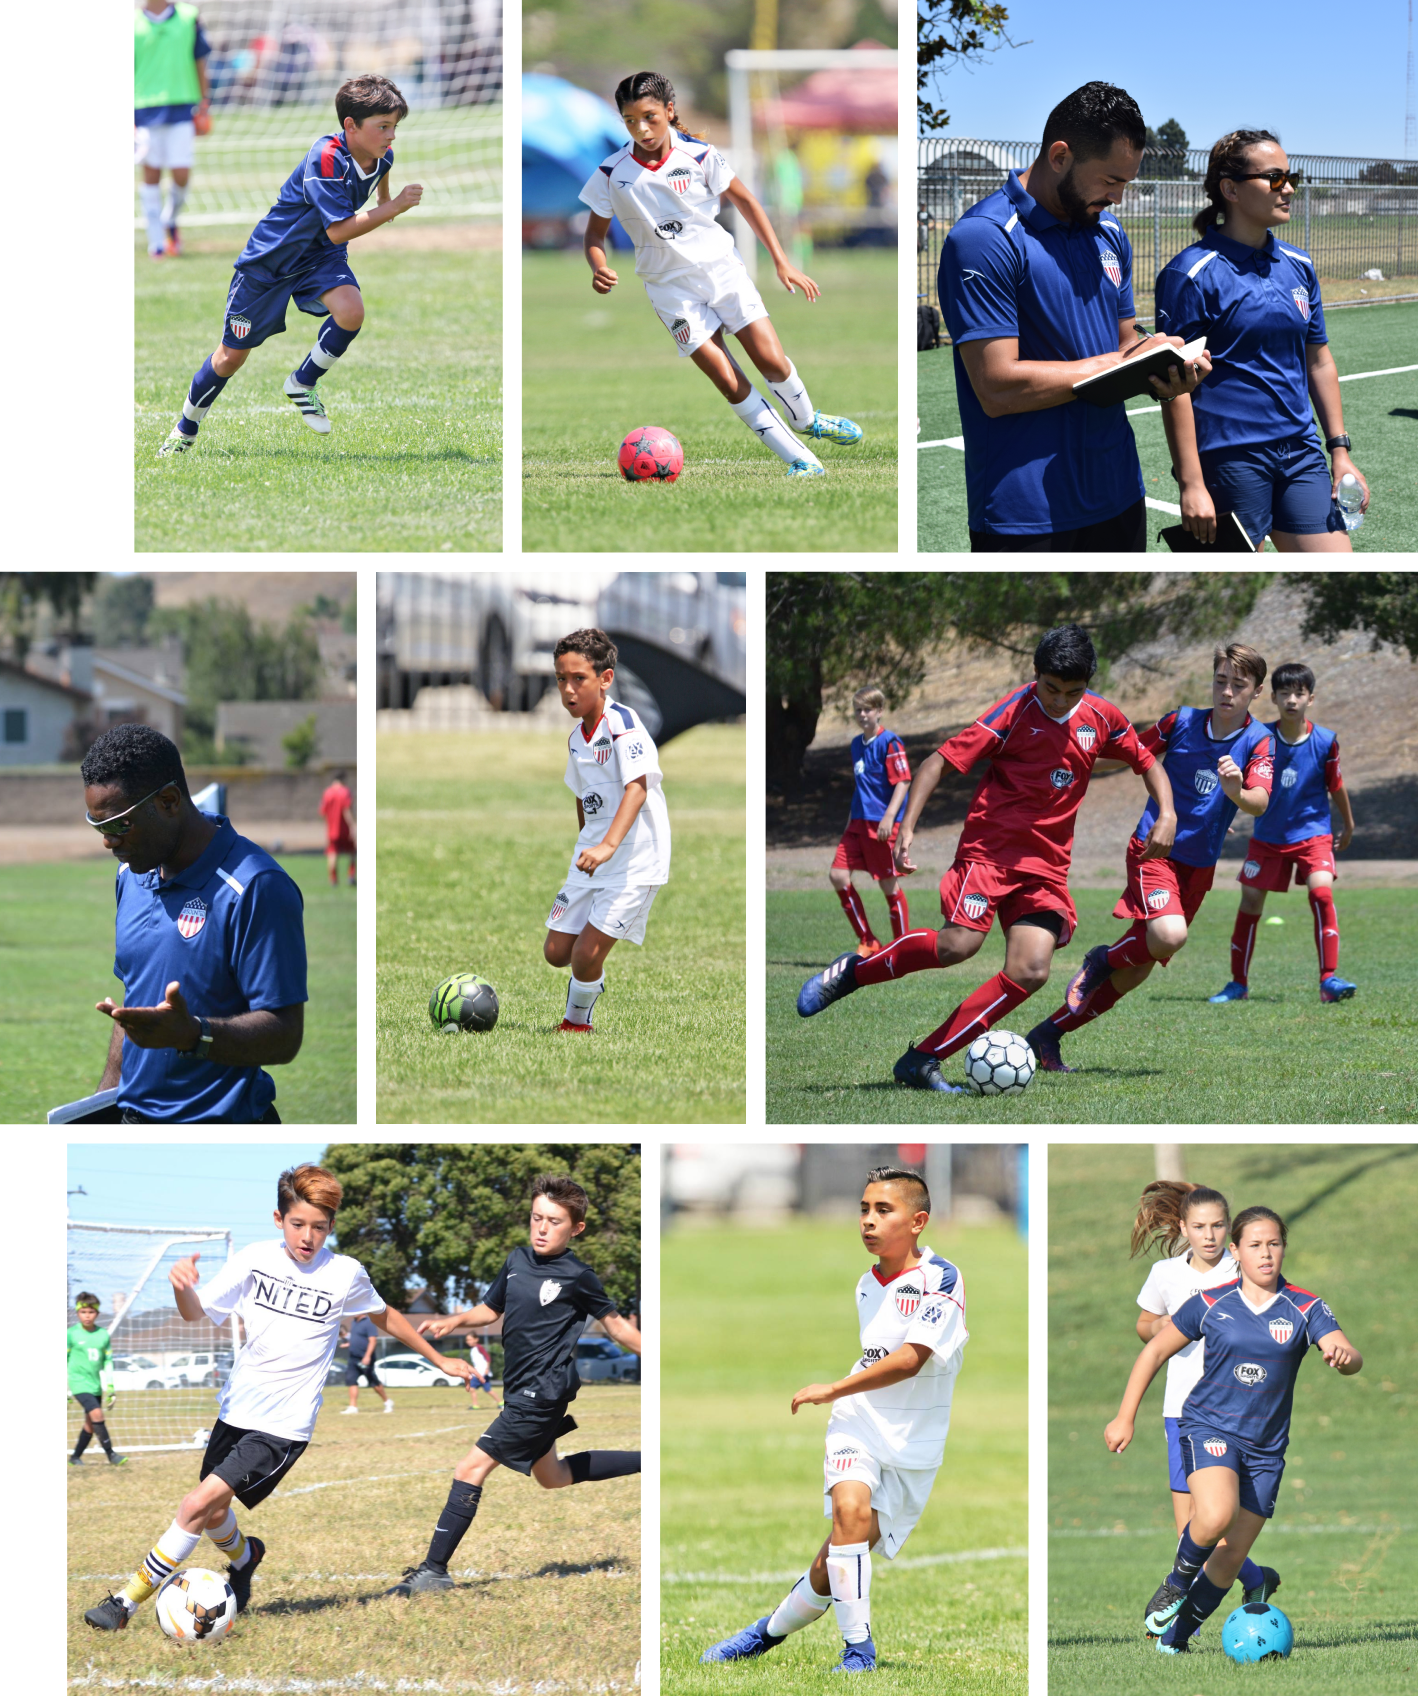 Collage of AYSO players and coaches